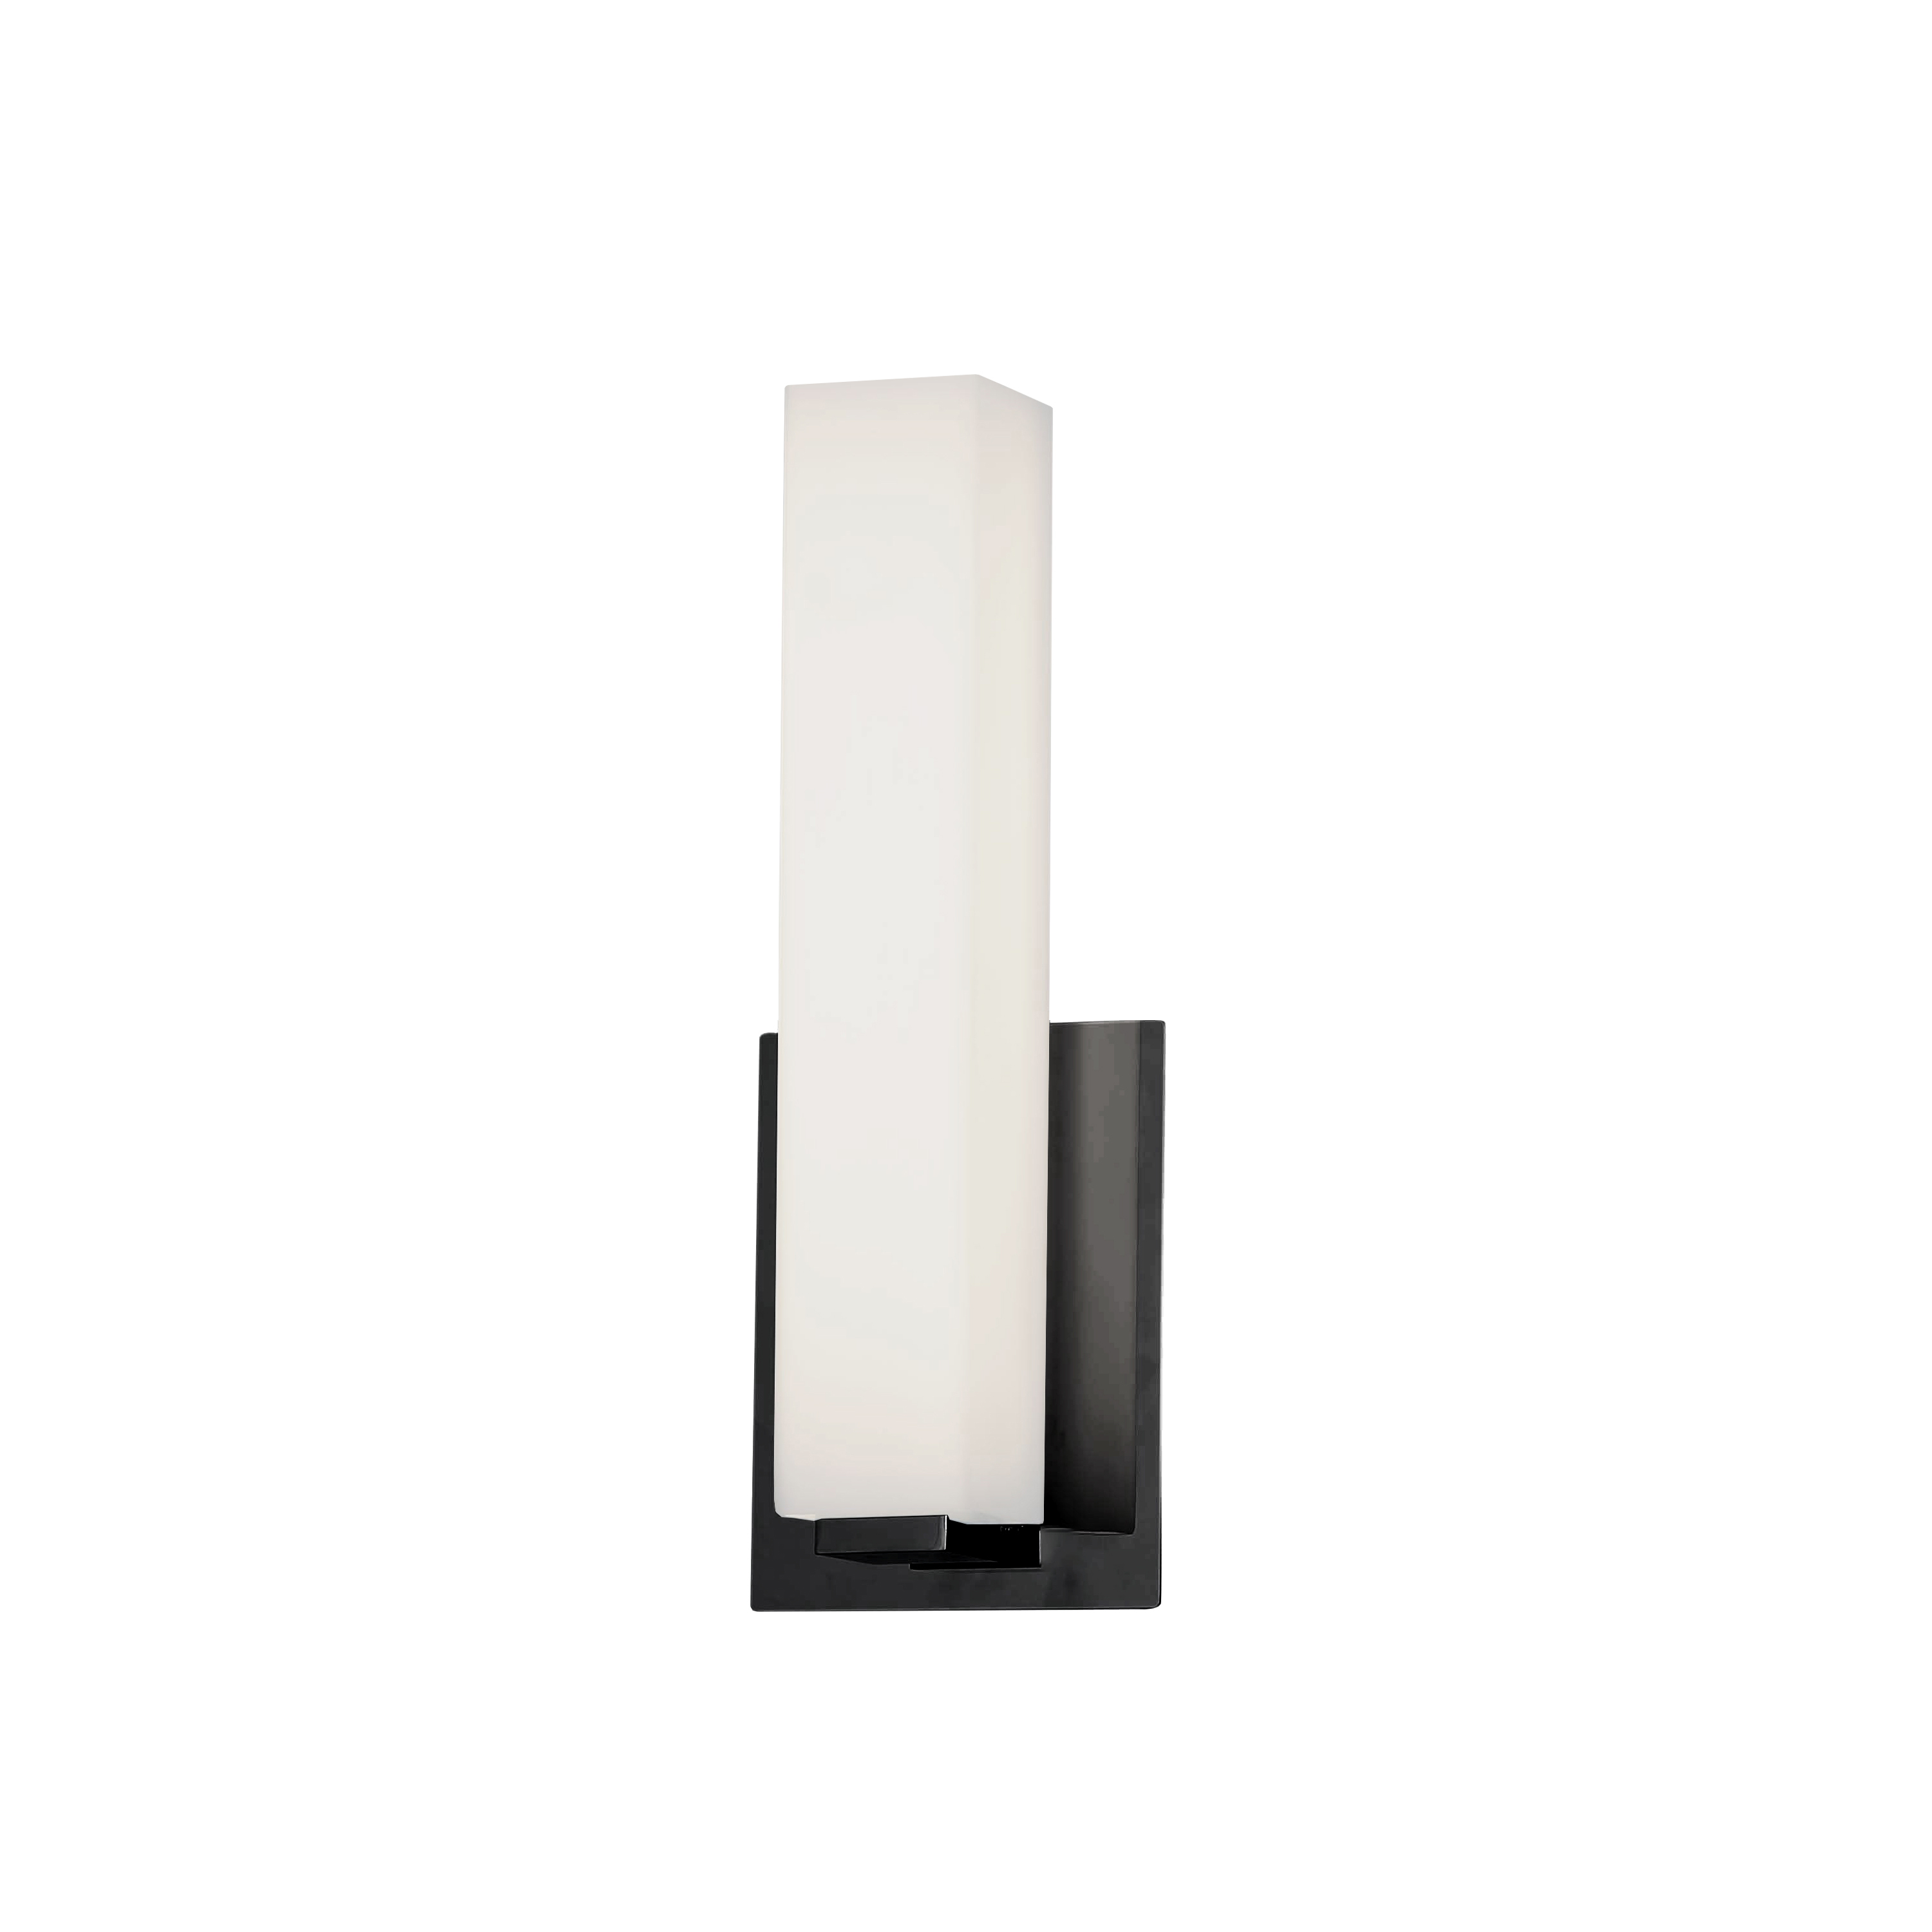 12W Wall Sconce, MB w/ WH Glass